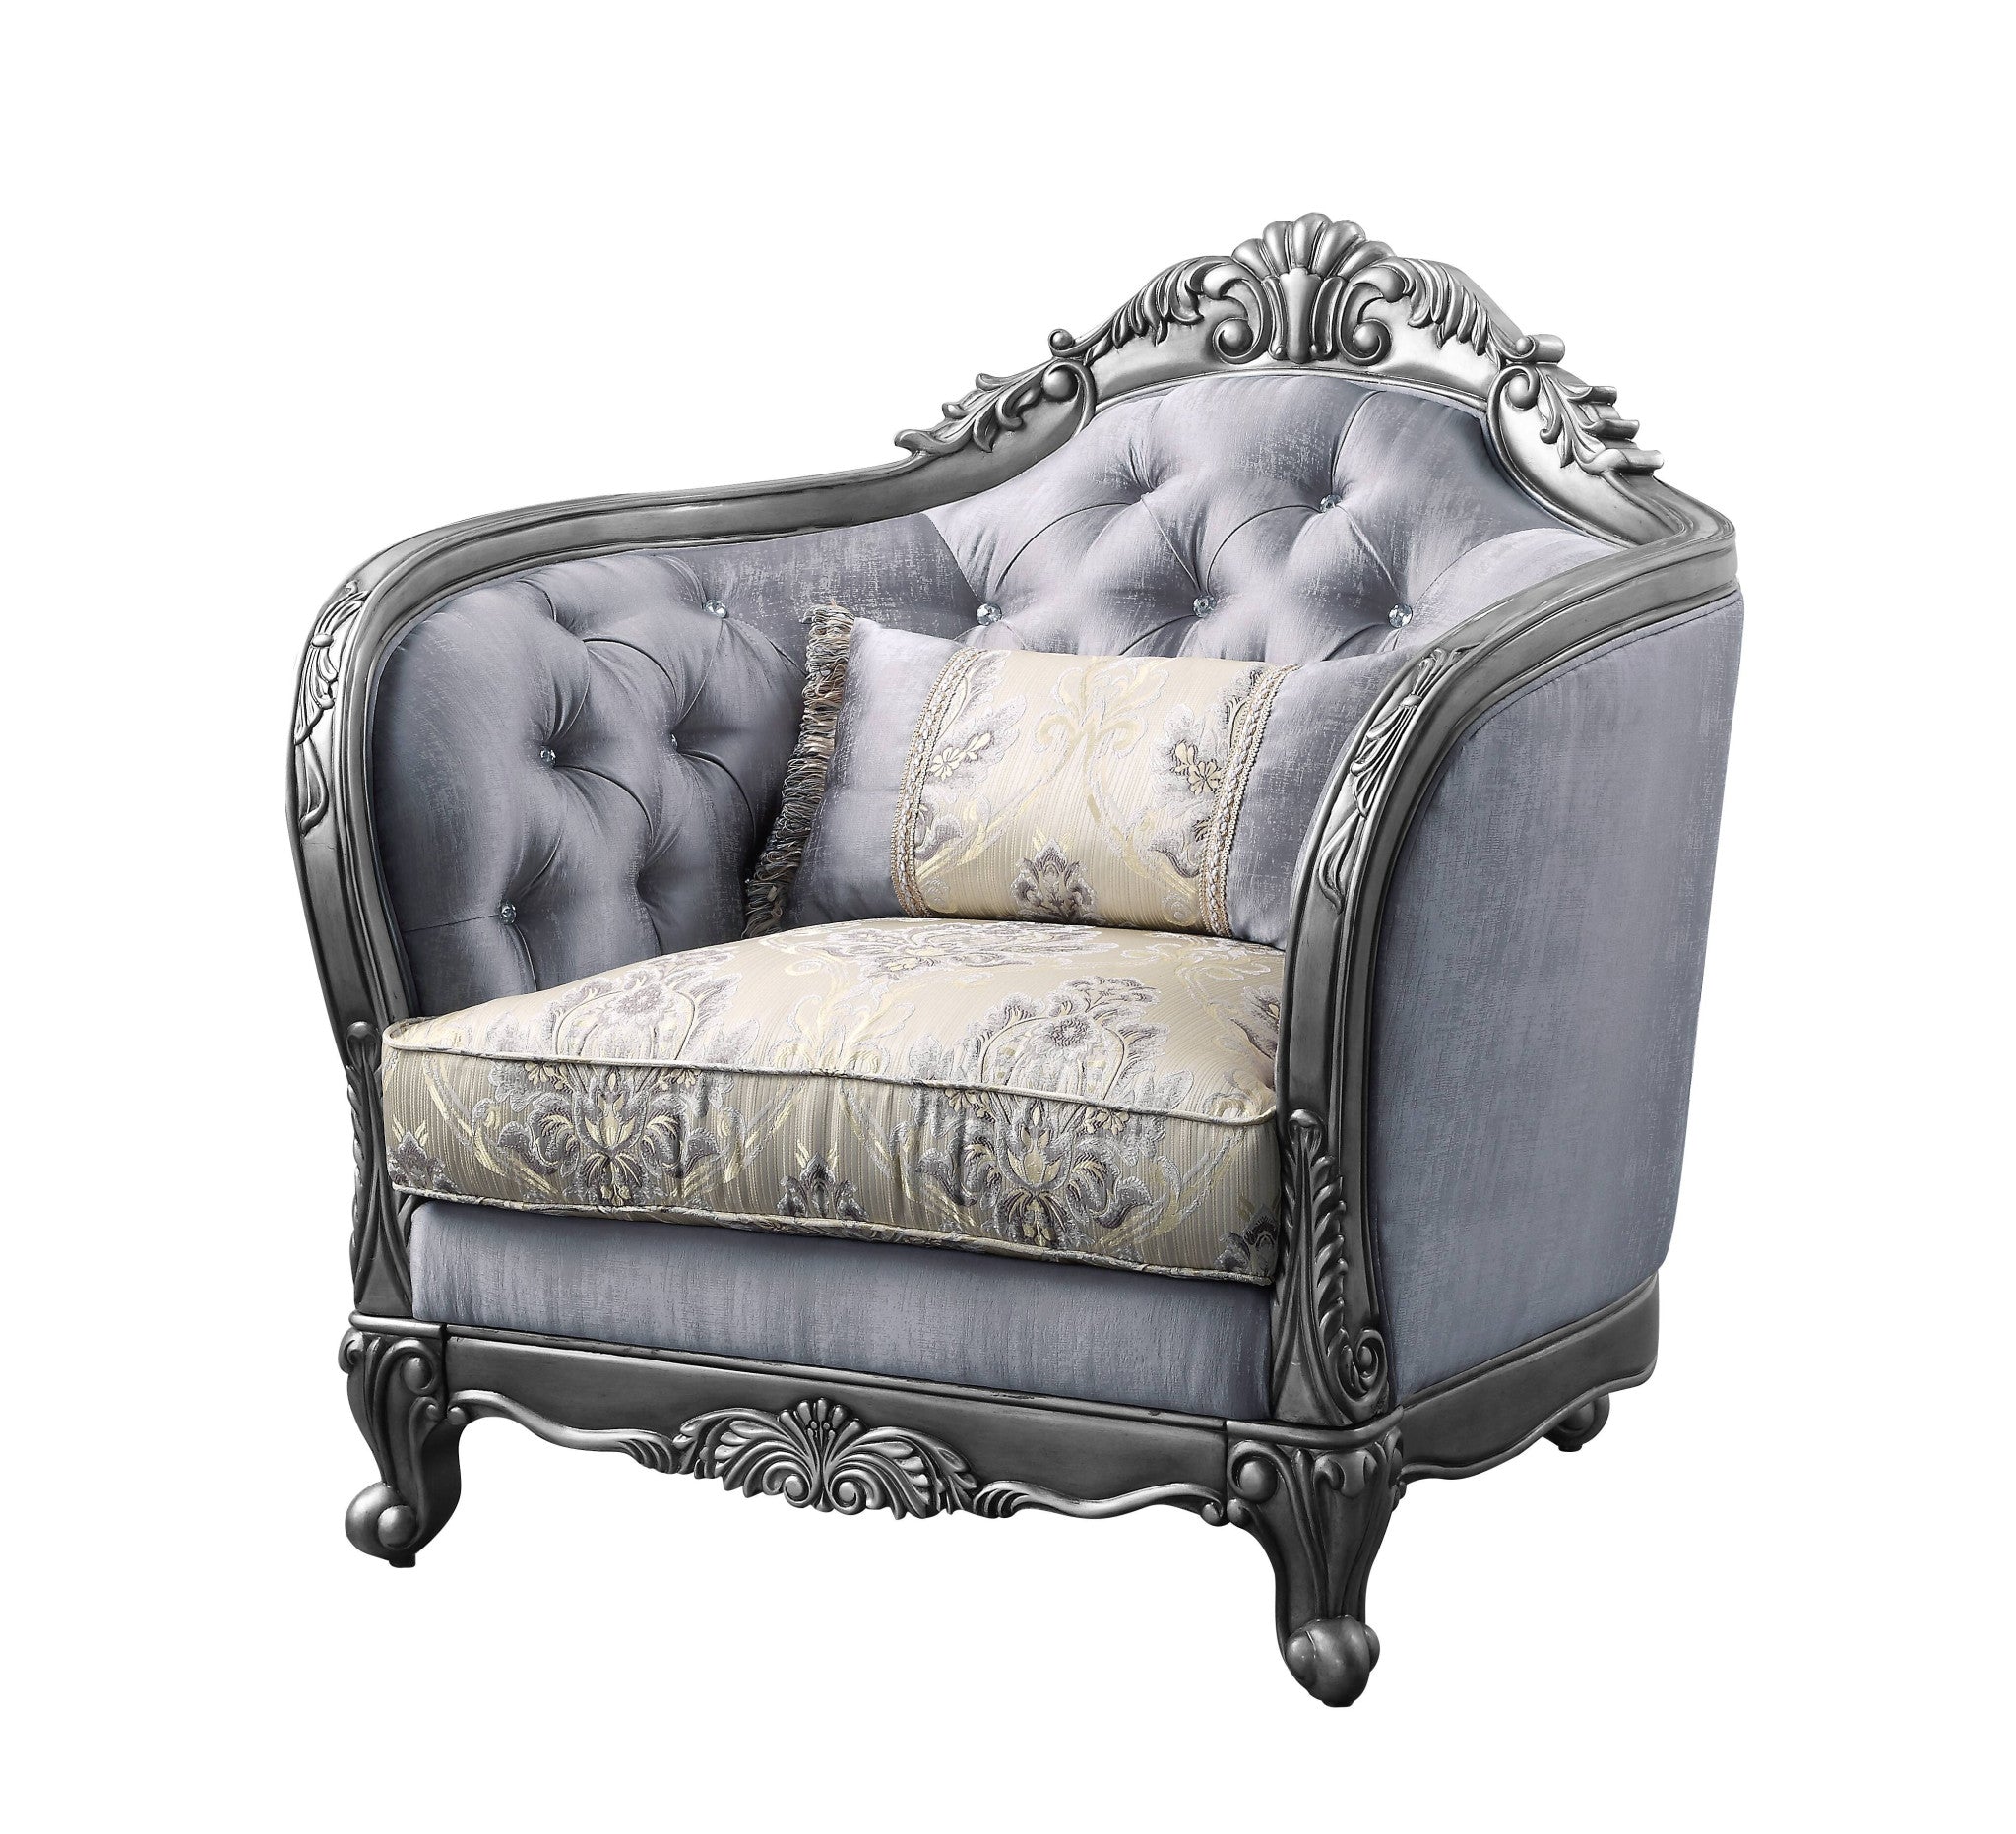 43" Light Gray Fabric And Platinum Floral Tufted Arm Chair